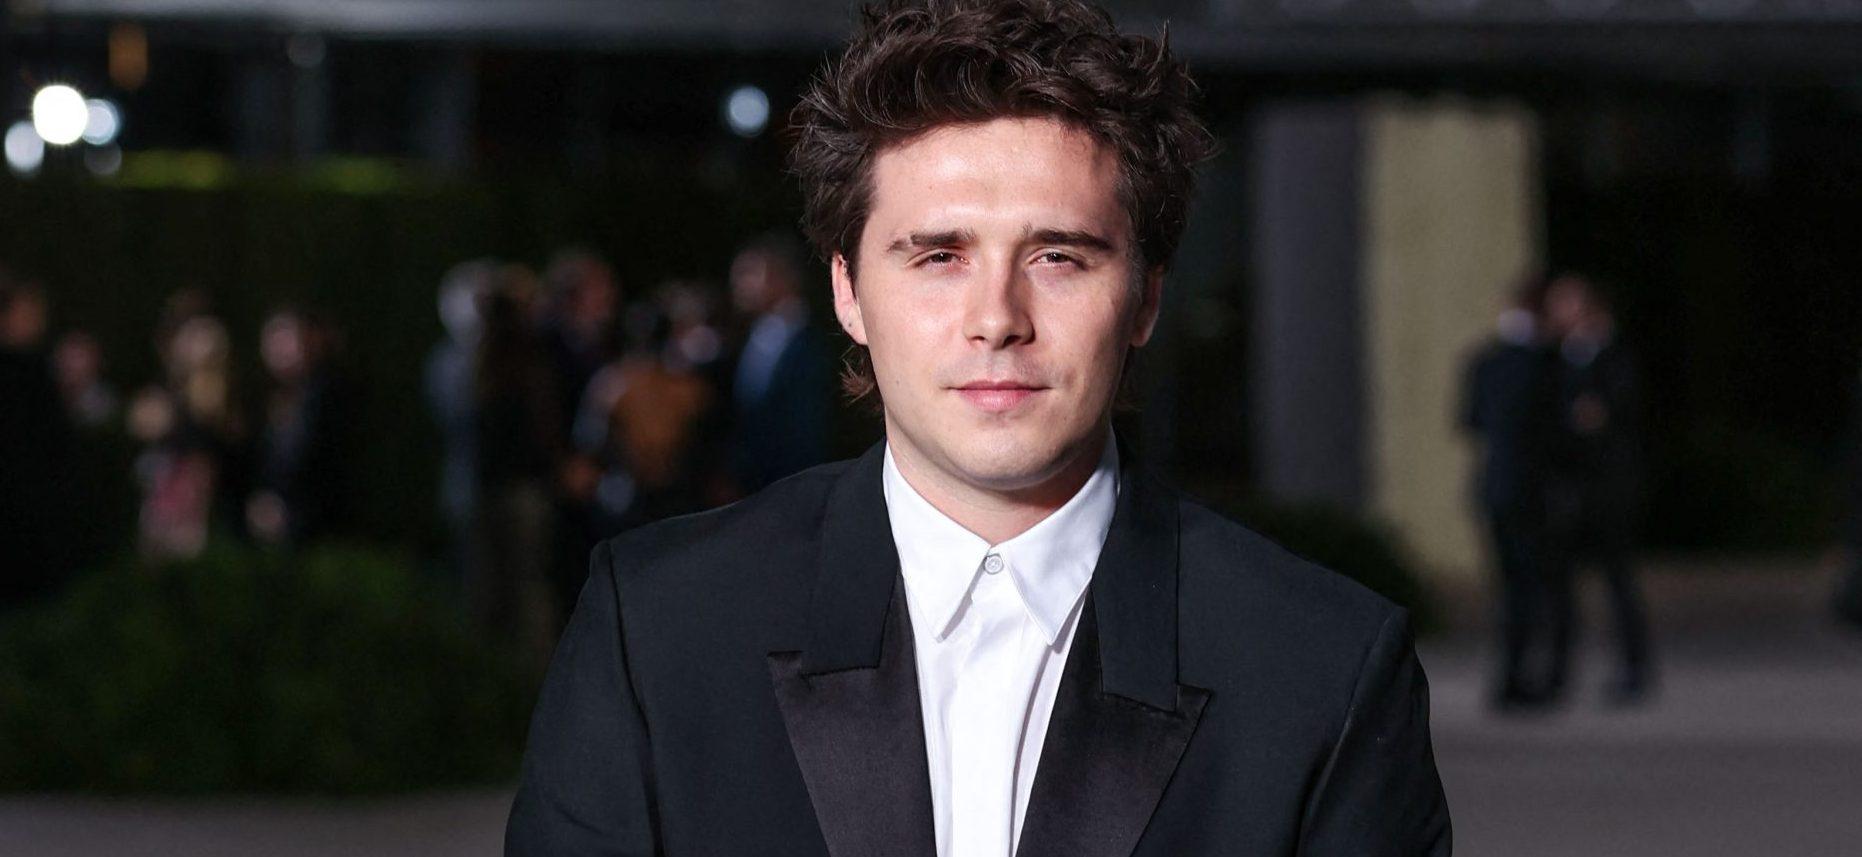 Brooklyn Beckham at 2nd Annual Academy Museum of Motion Pictures Gala